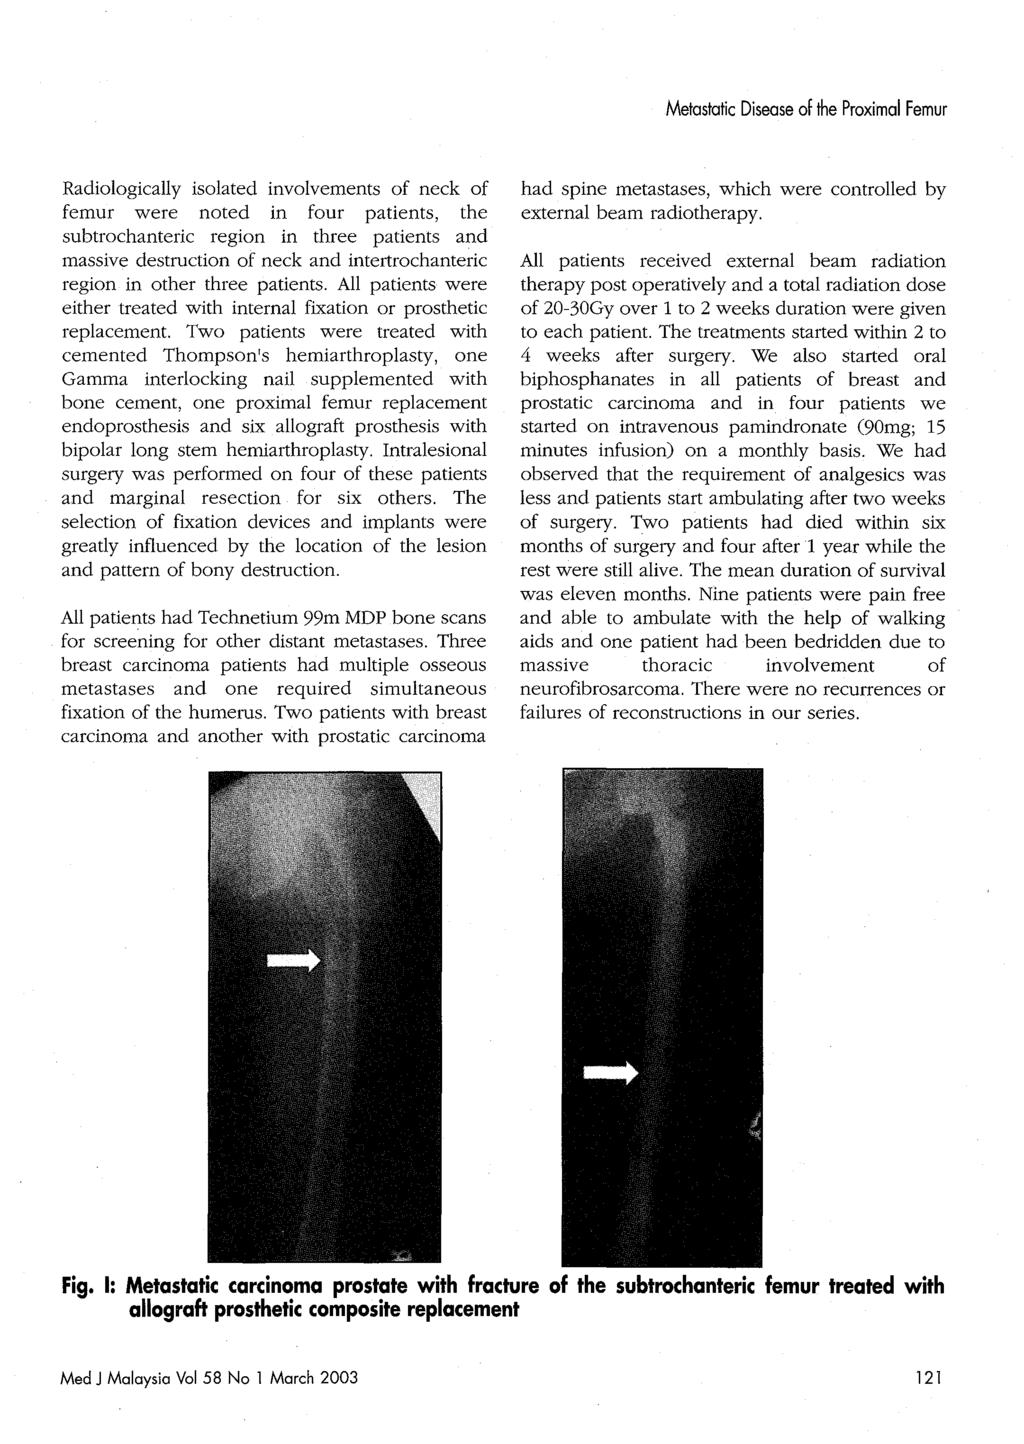 Metastatic Disease of the Proximal Femur Radiologically isolated involvements of neck of femur were noted in four patients, the subtrochanteric region in three patients and massive destruction of